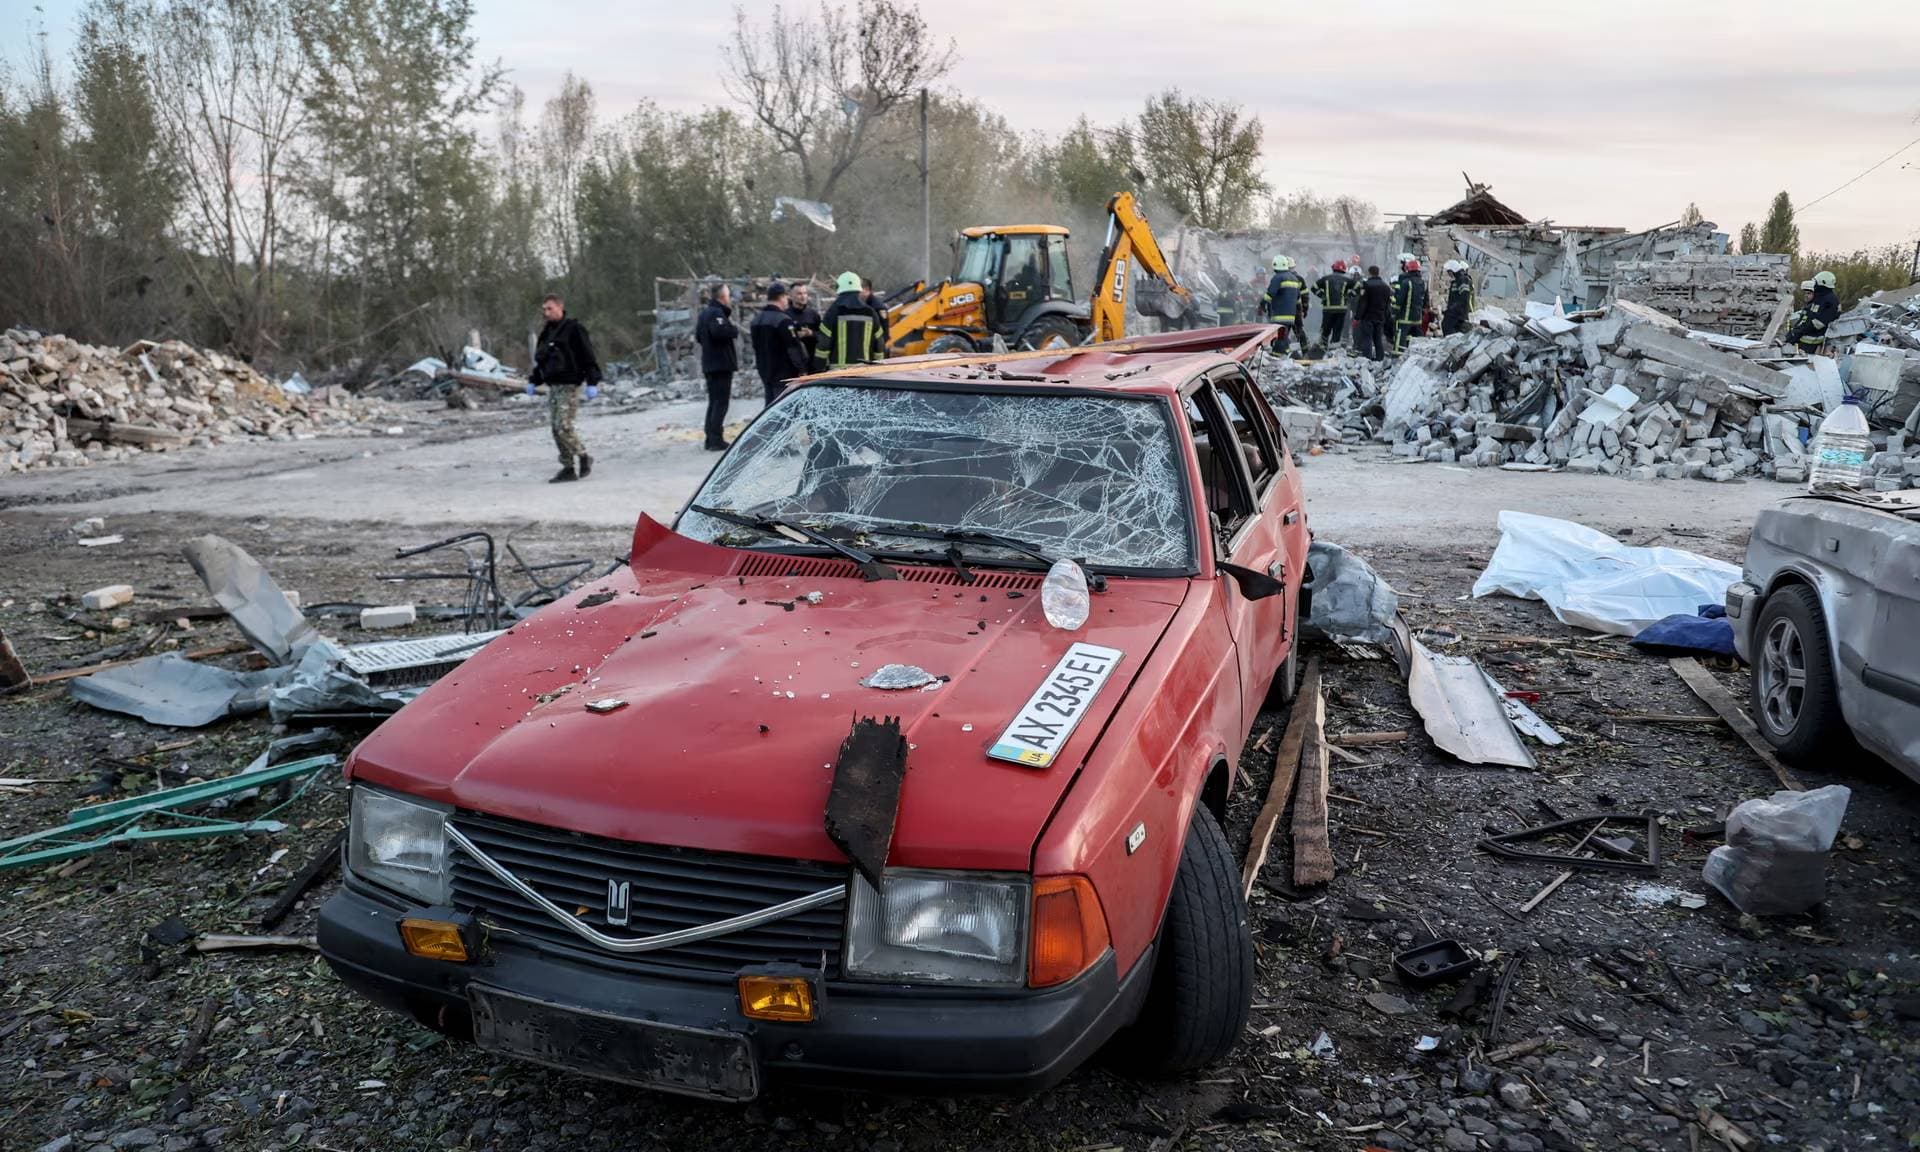 At least 51 people were killed after a rocket struck a cafe in a village in Ukraine's Kharkiv region during a wake service